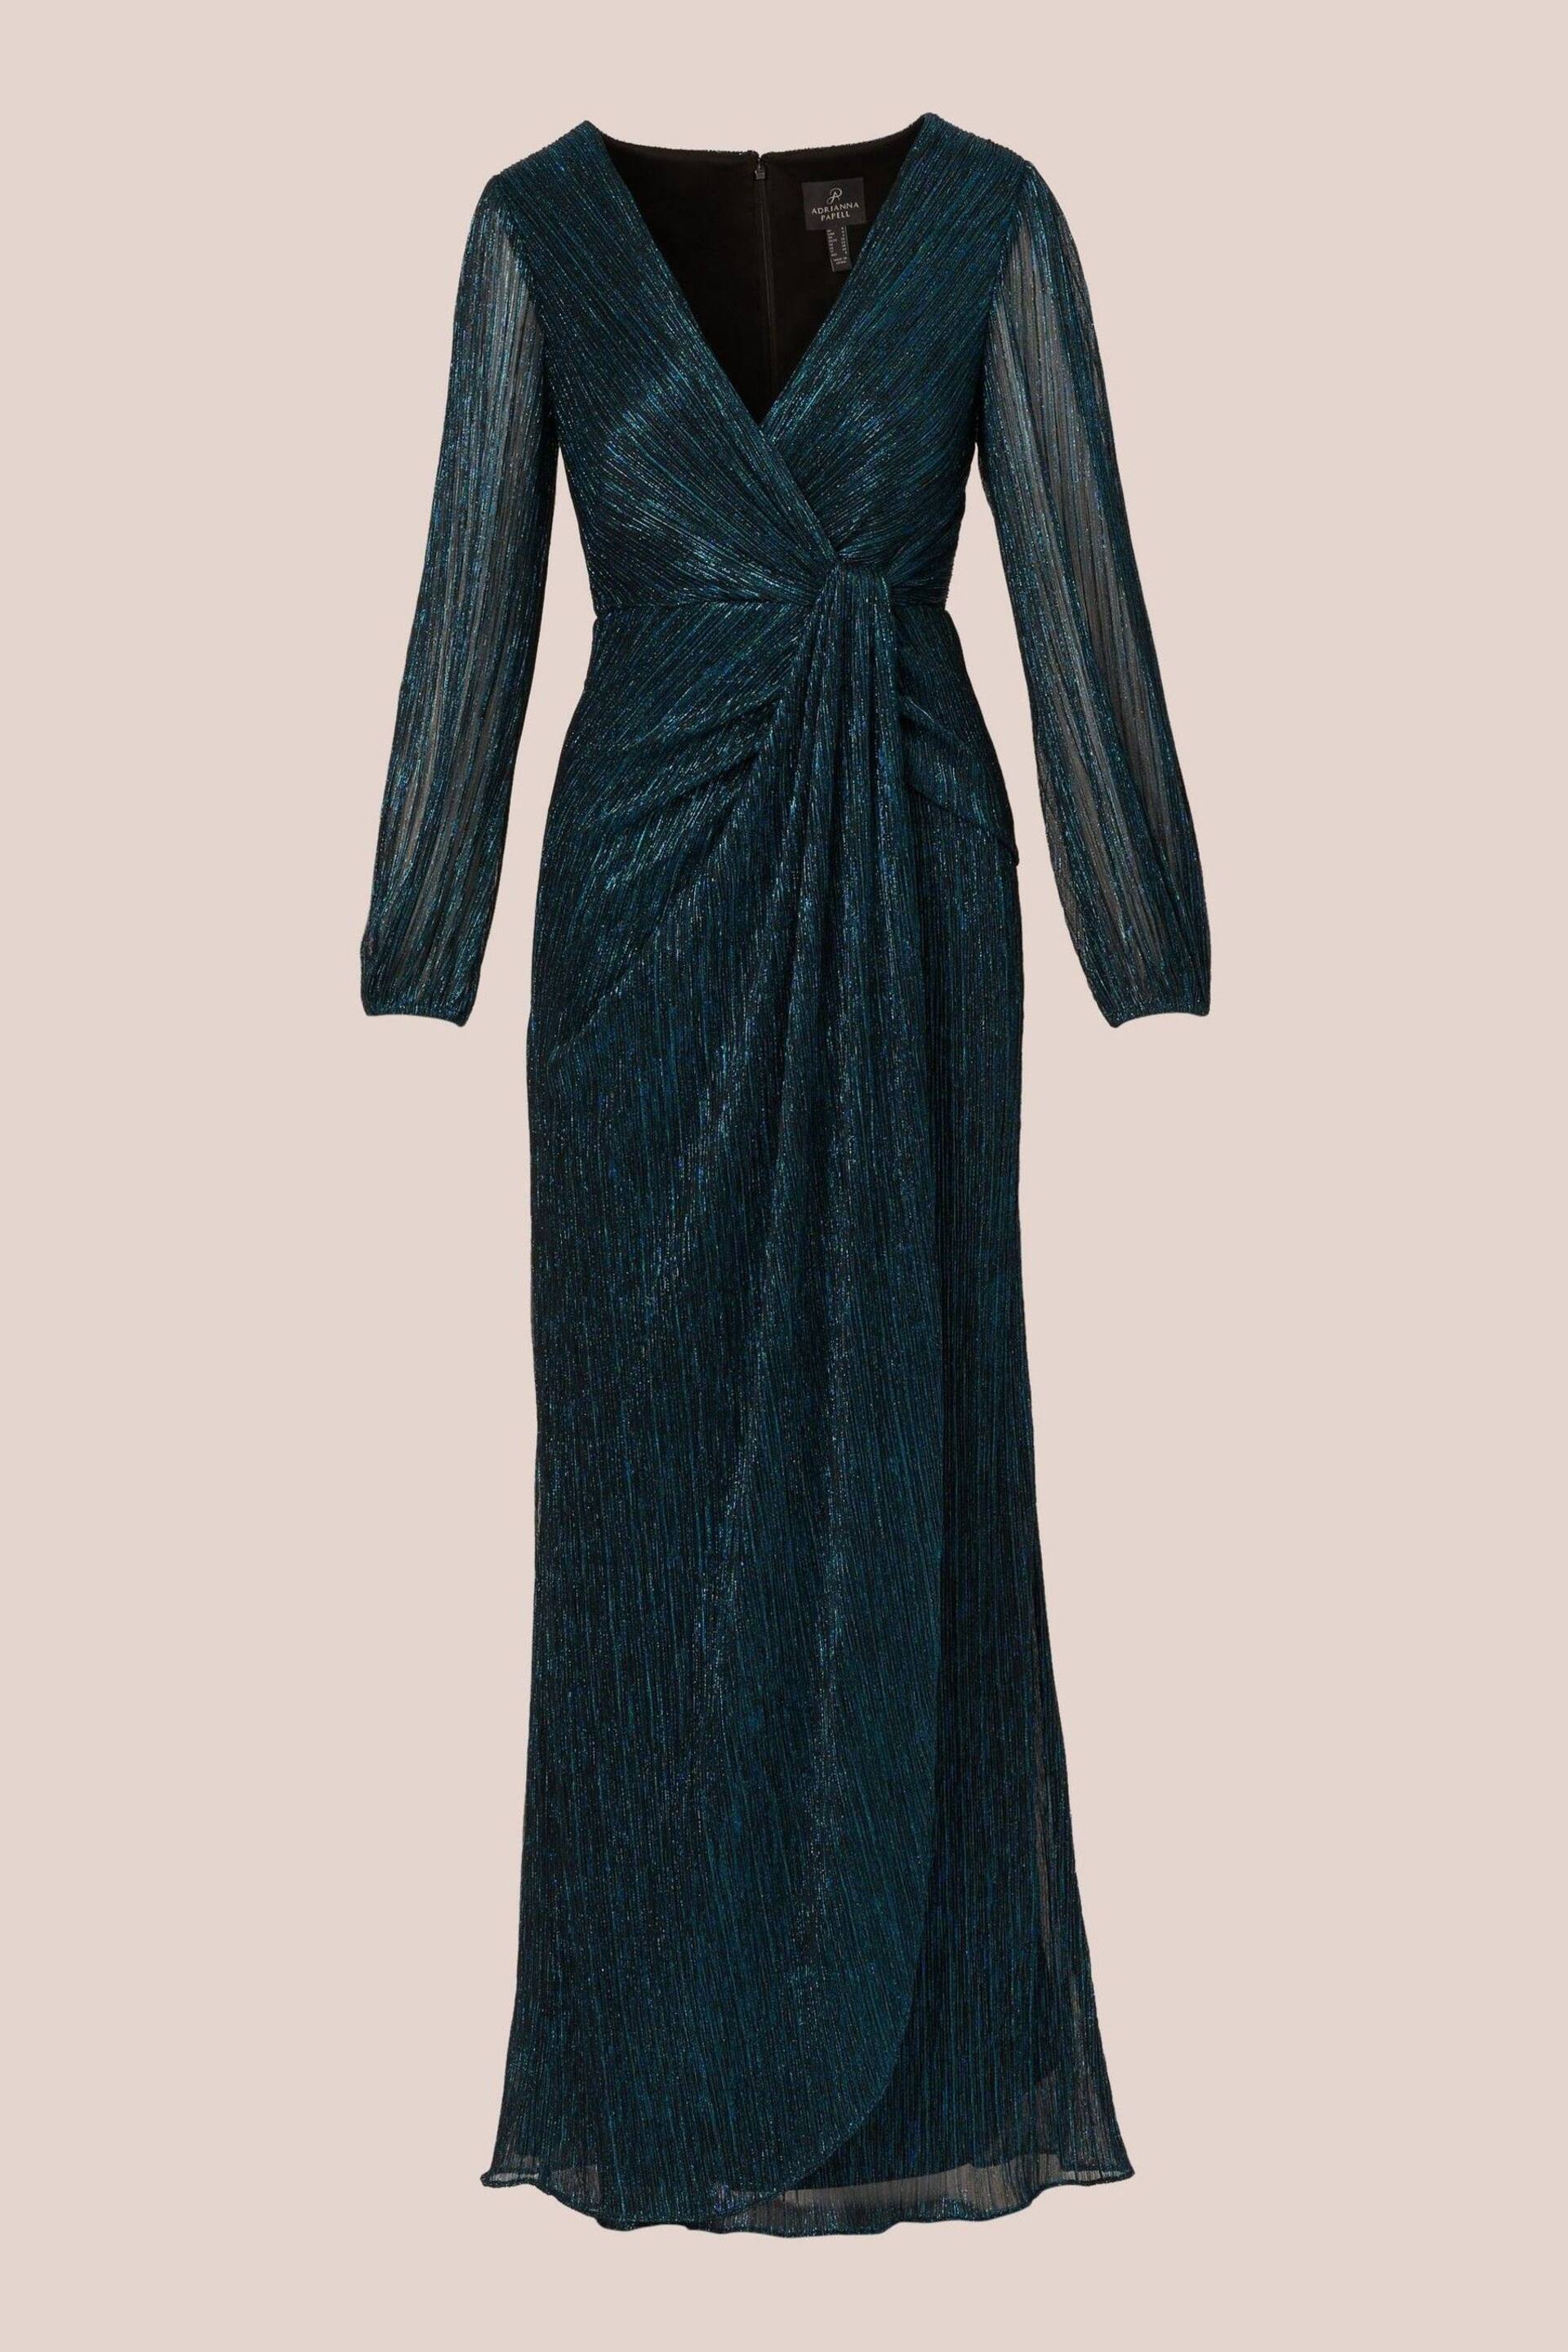 Adrianna Papell Blue Metallic Mesh Draped Gown - Image 6 of 7